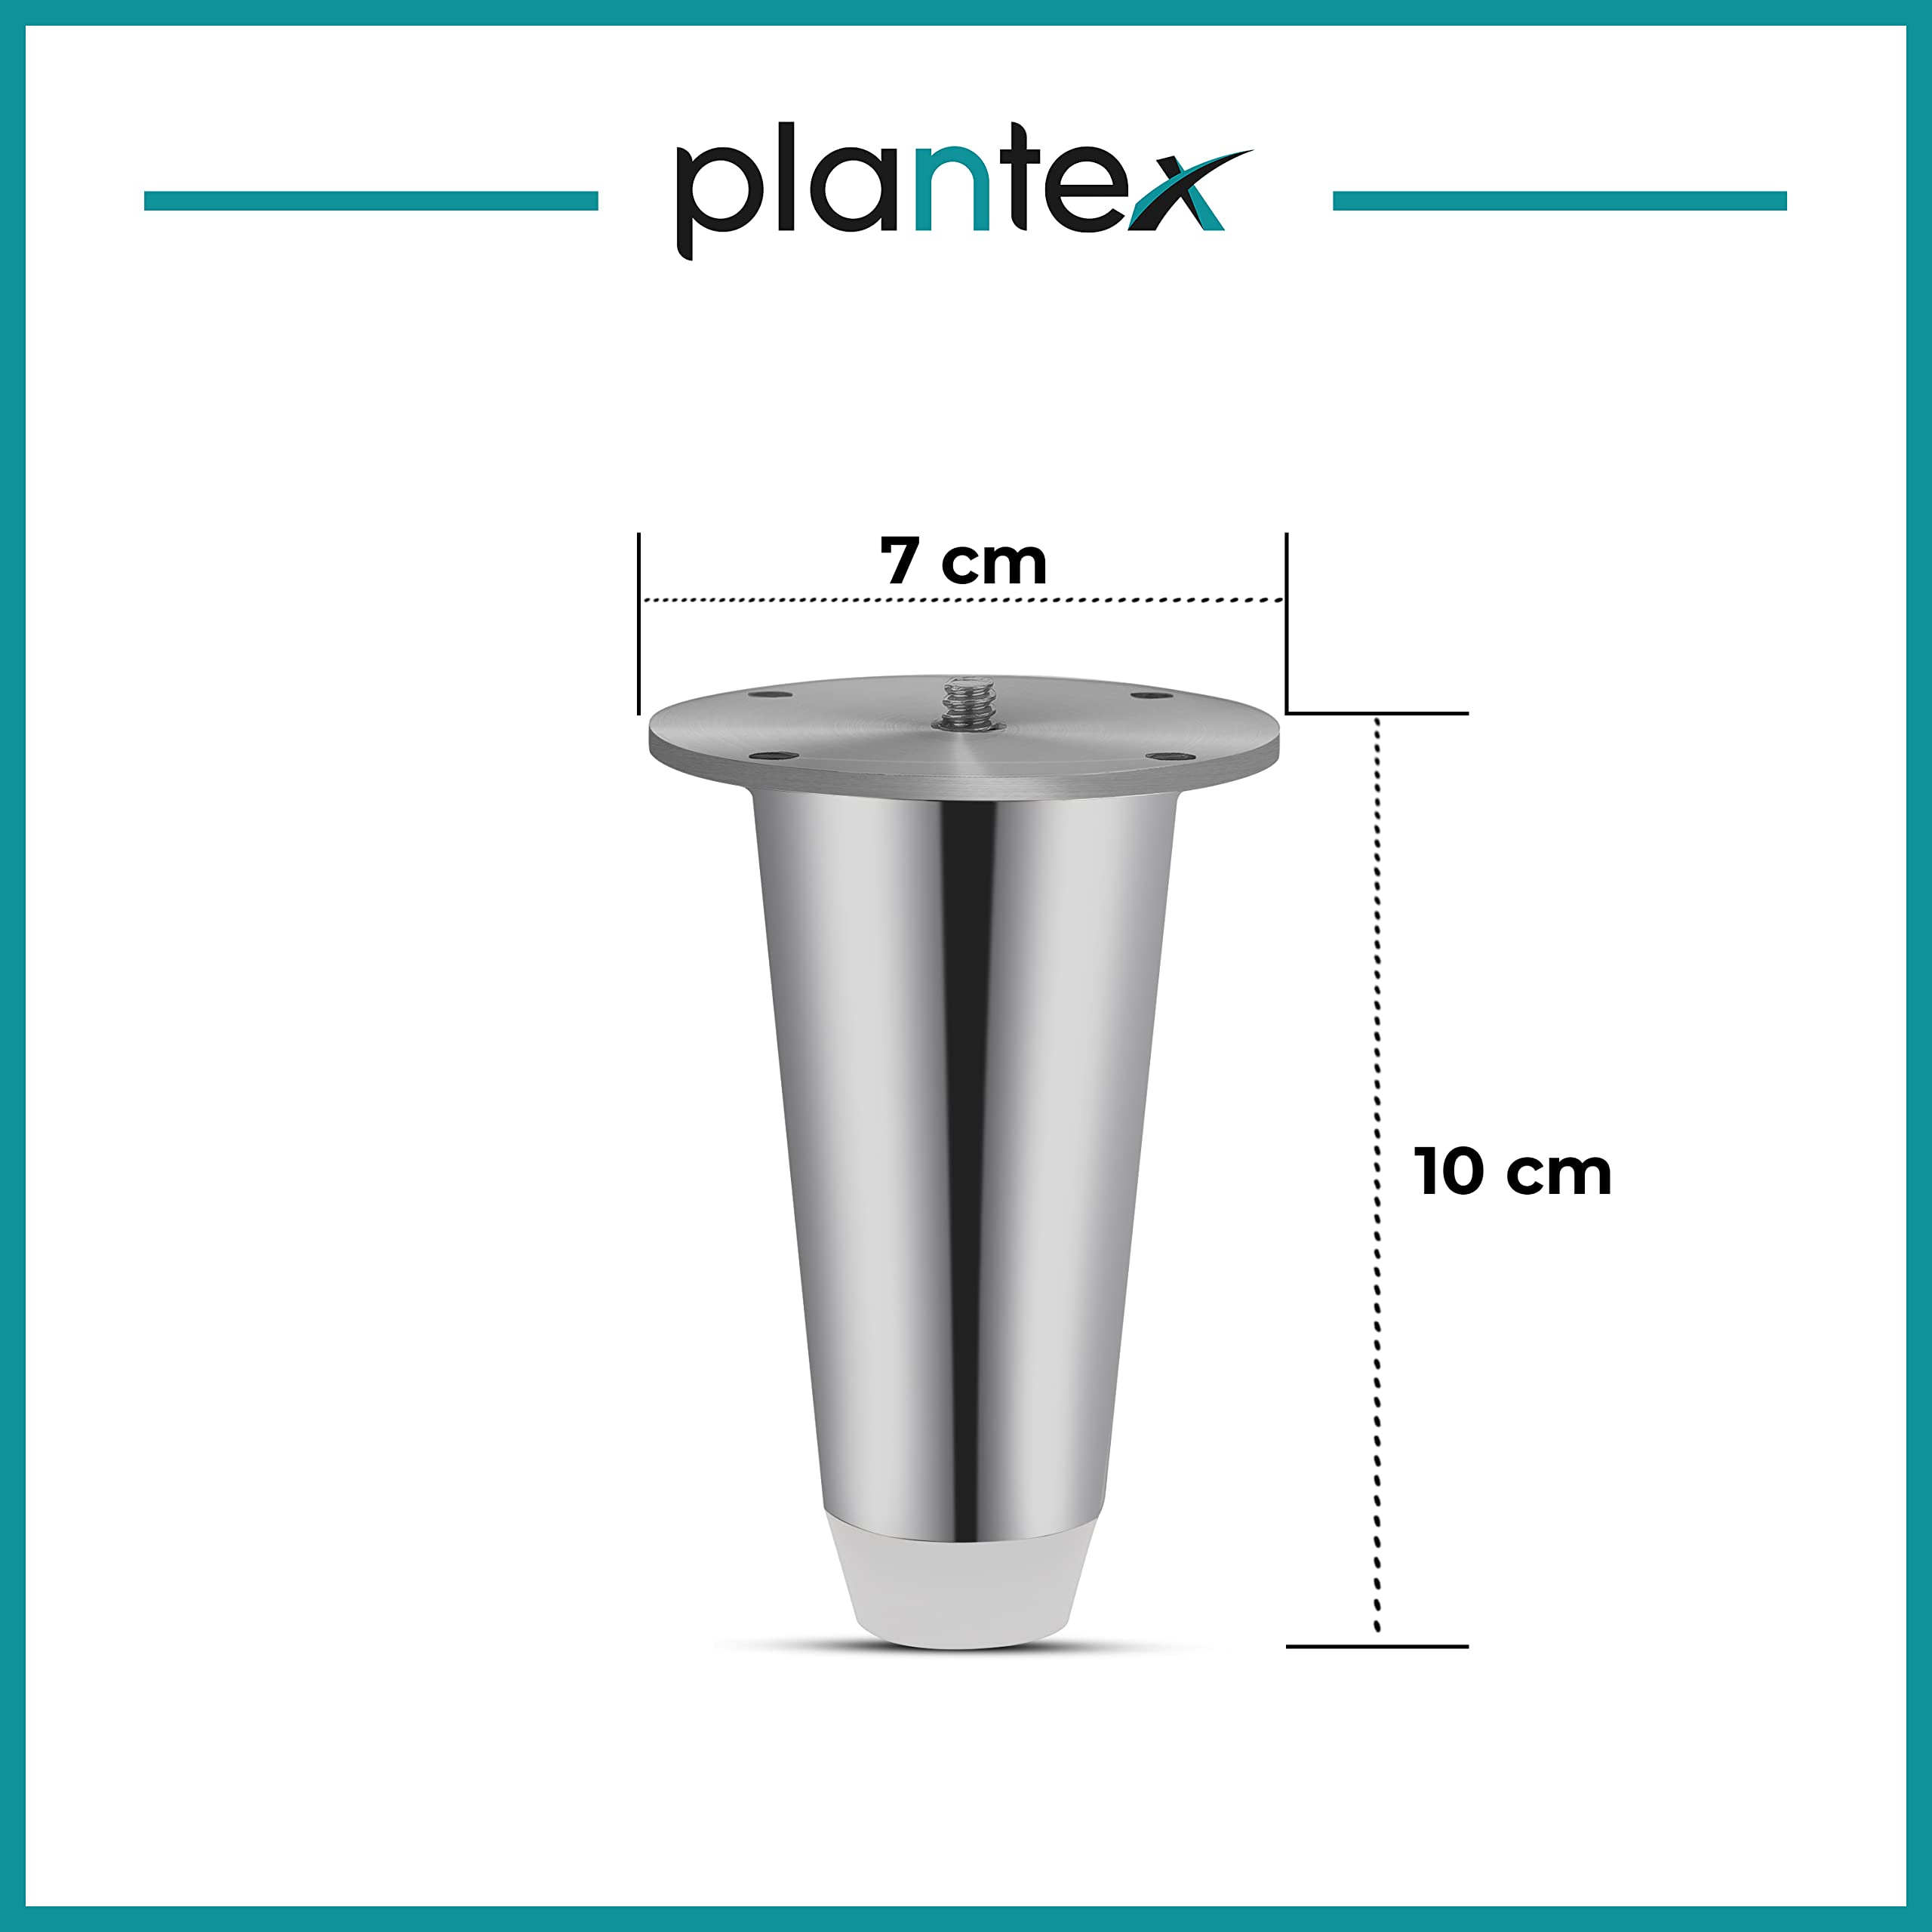 Plantex Heavy Duty Stainless Steel 4 inch Sofa Leg/Bed Furniture Leg Pair for Home Furnitures (DTS-53, Chrome) – 2 Pcs